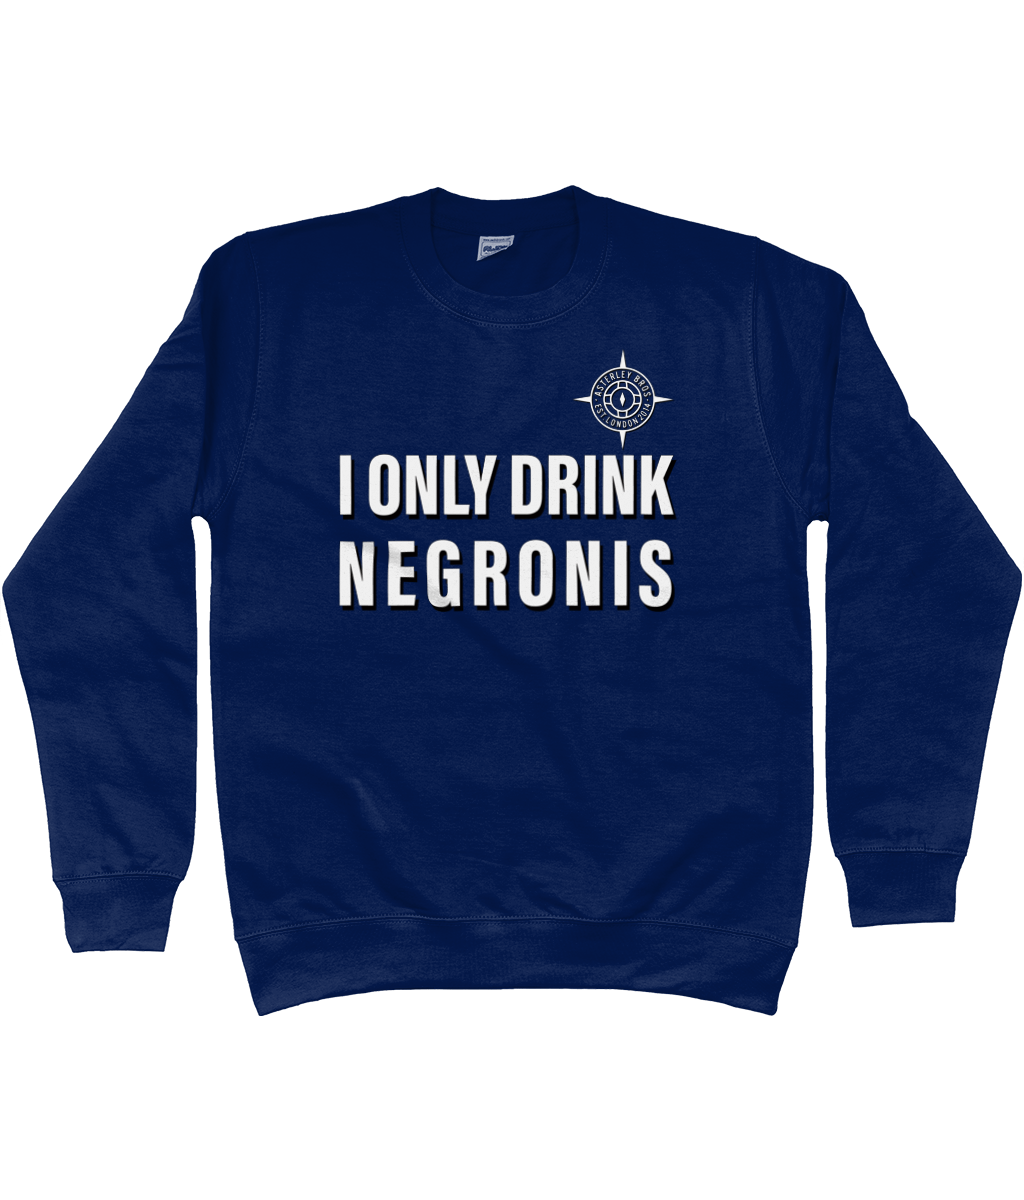 I ONLY DRINK NEGRONIS - THE SWEATSHIRT